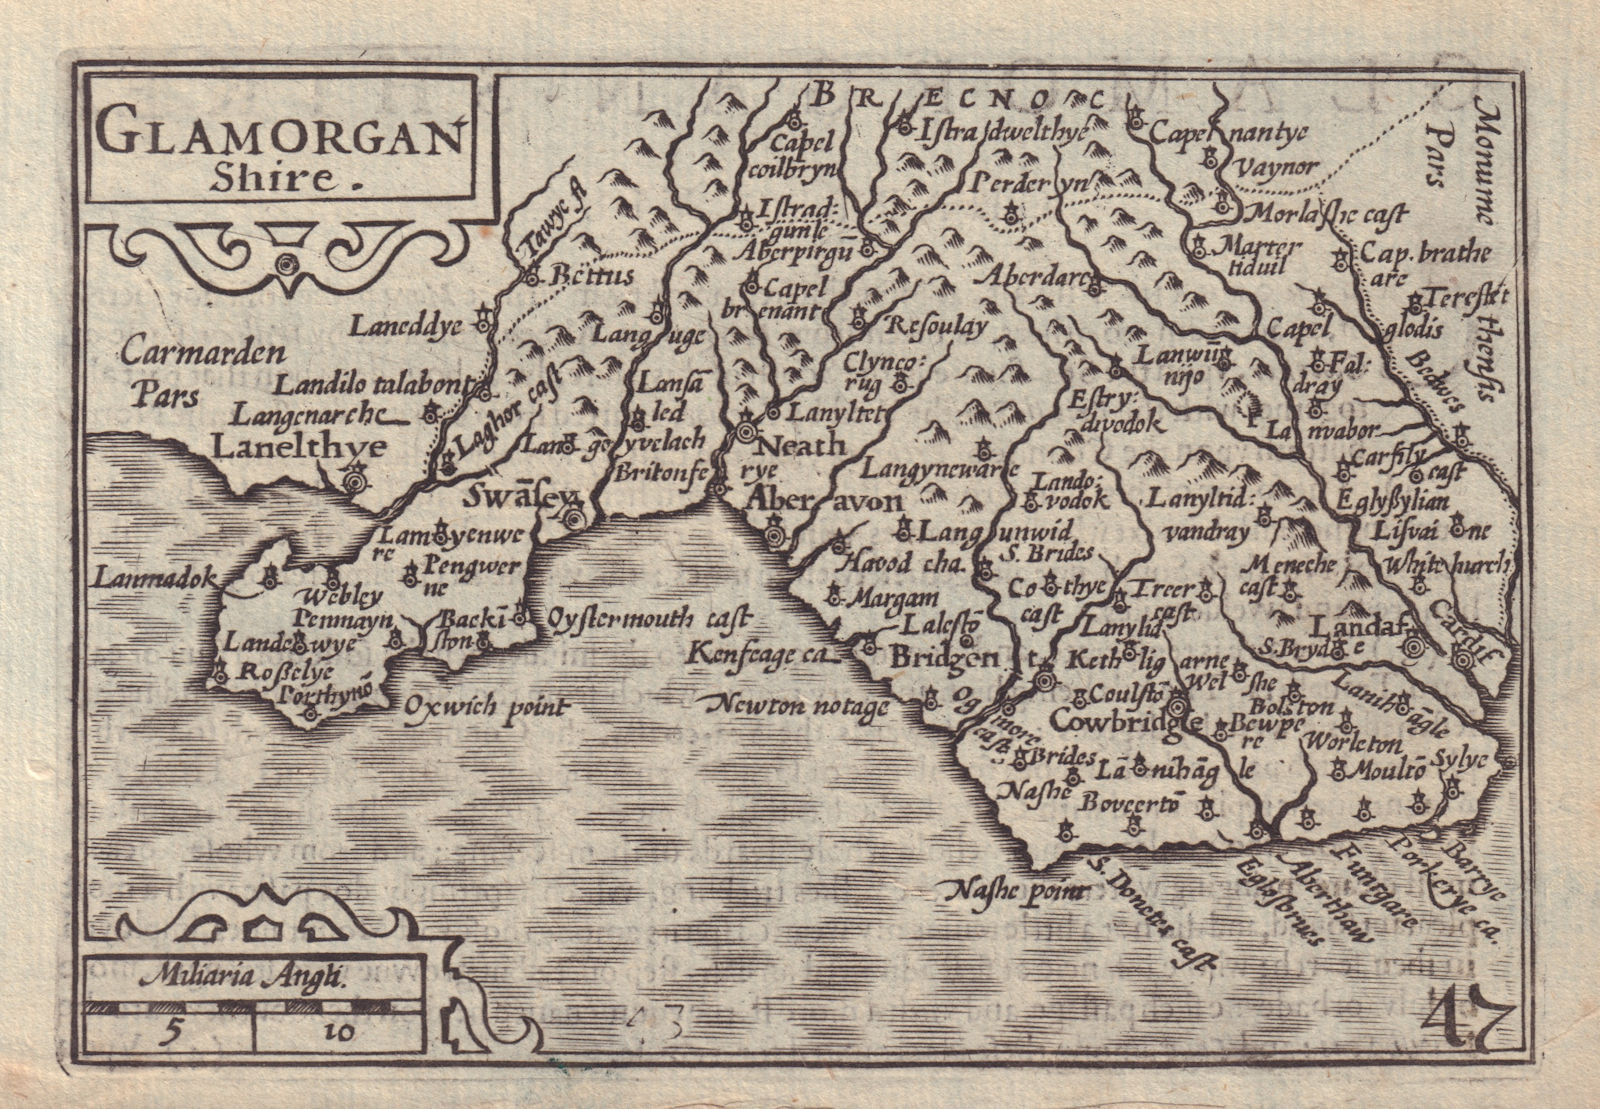 Glamorgan Shire by Keere. "Speed miniature" Glamorganshire county map 1632